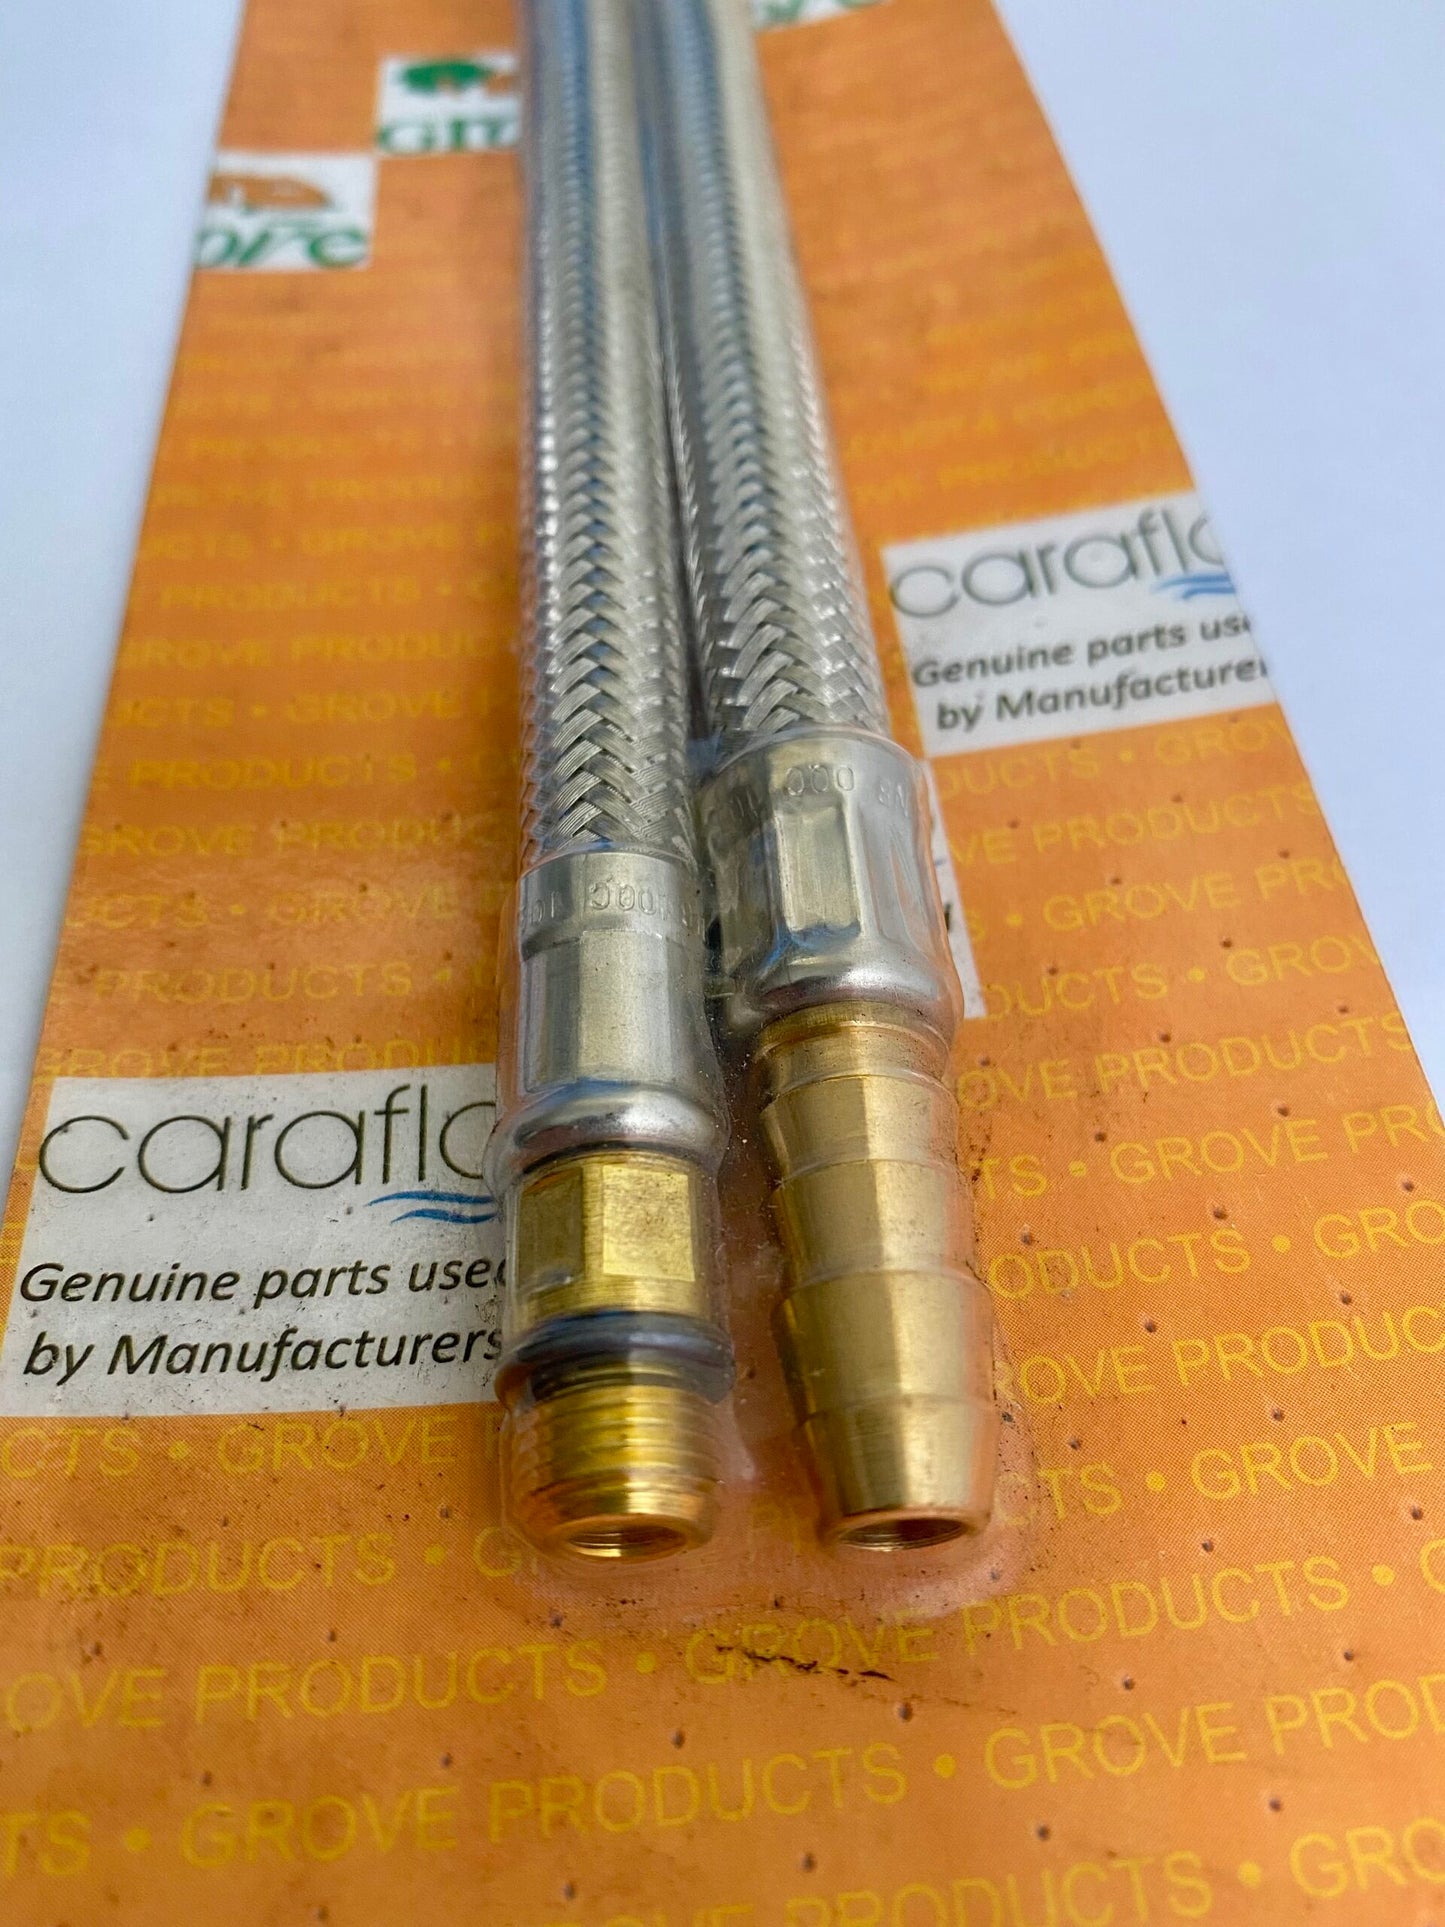 Caraflo SP210 12mm Cone End Metal Tap Tails